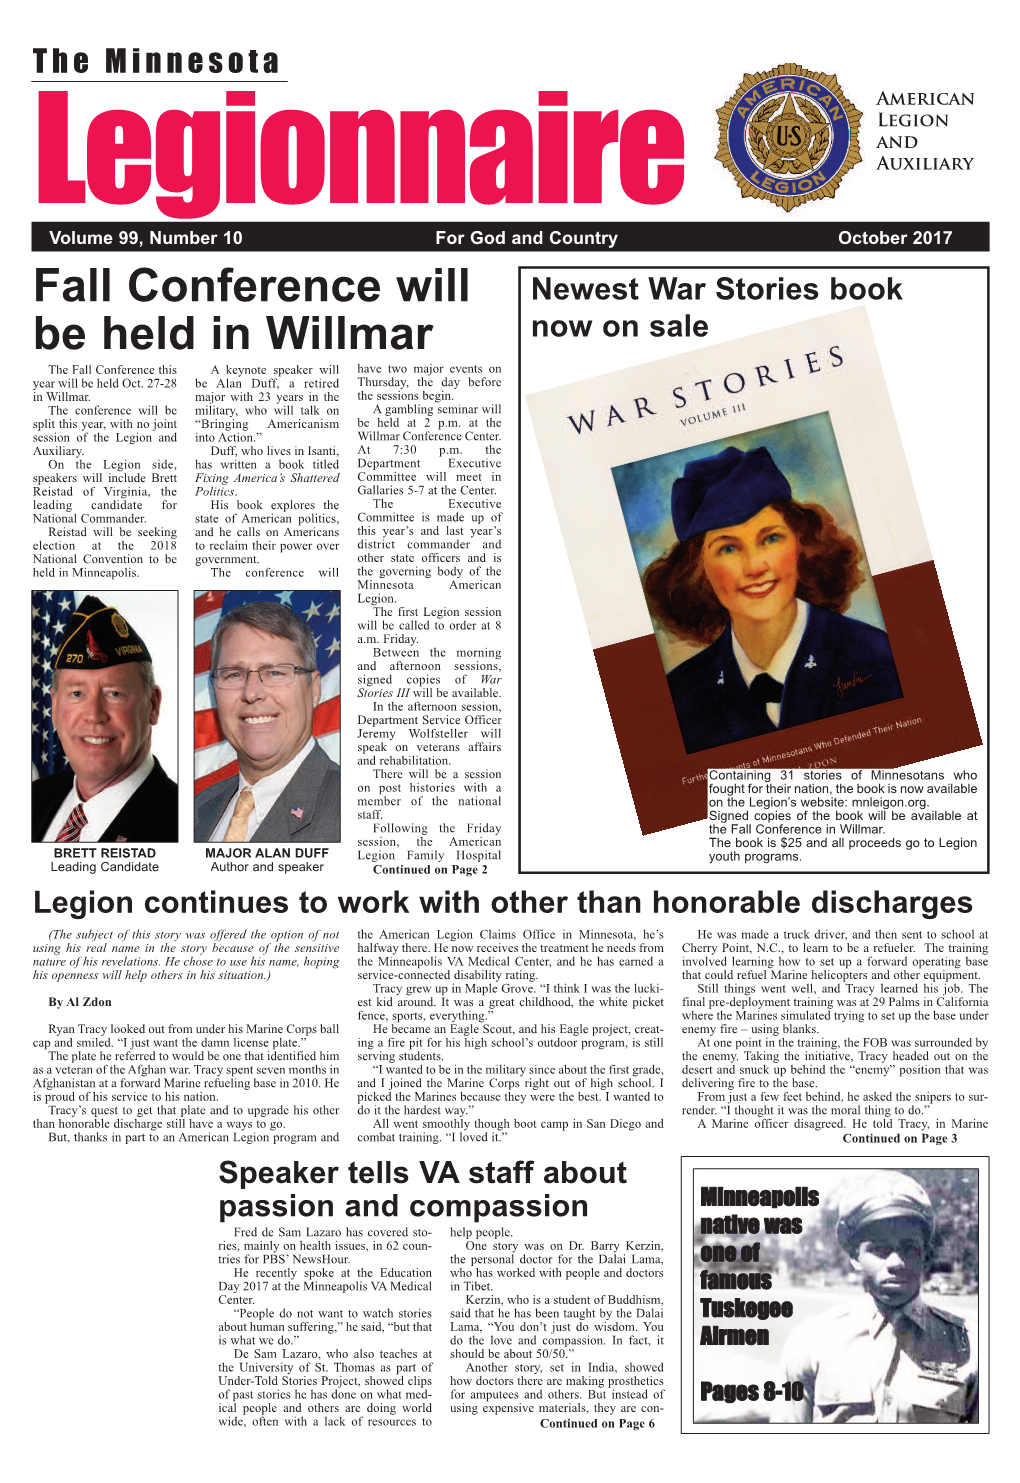 Fall Conference Will Be Held in Willmar